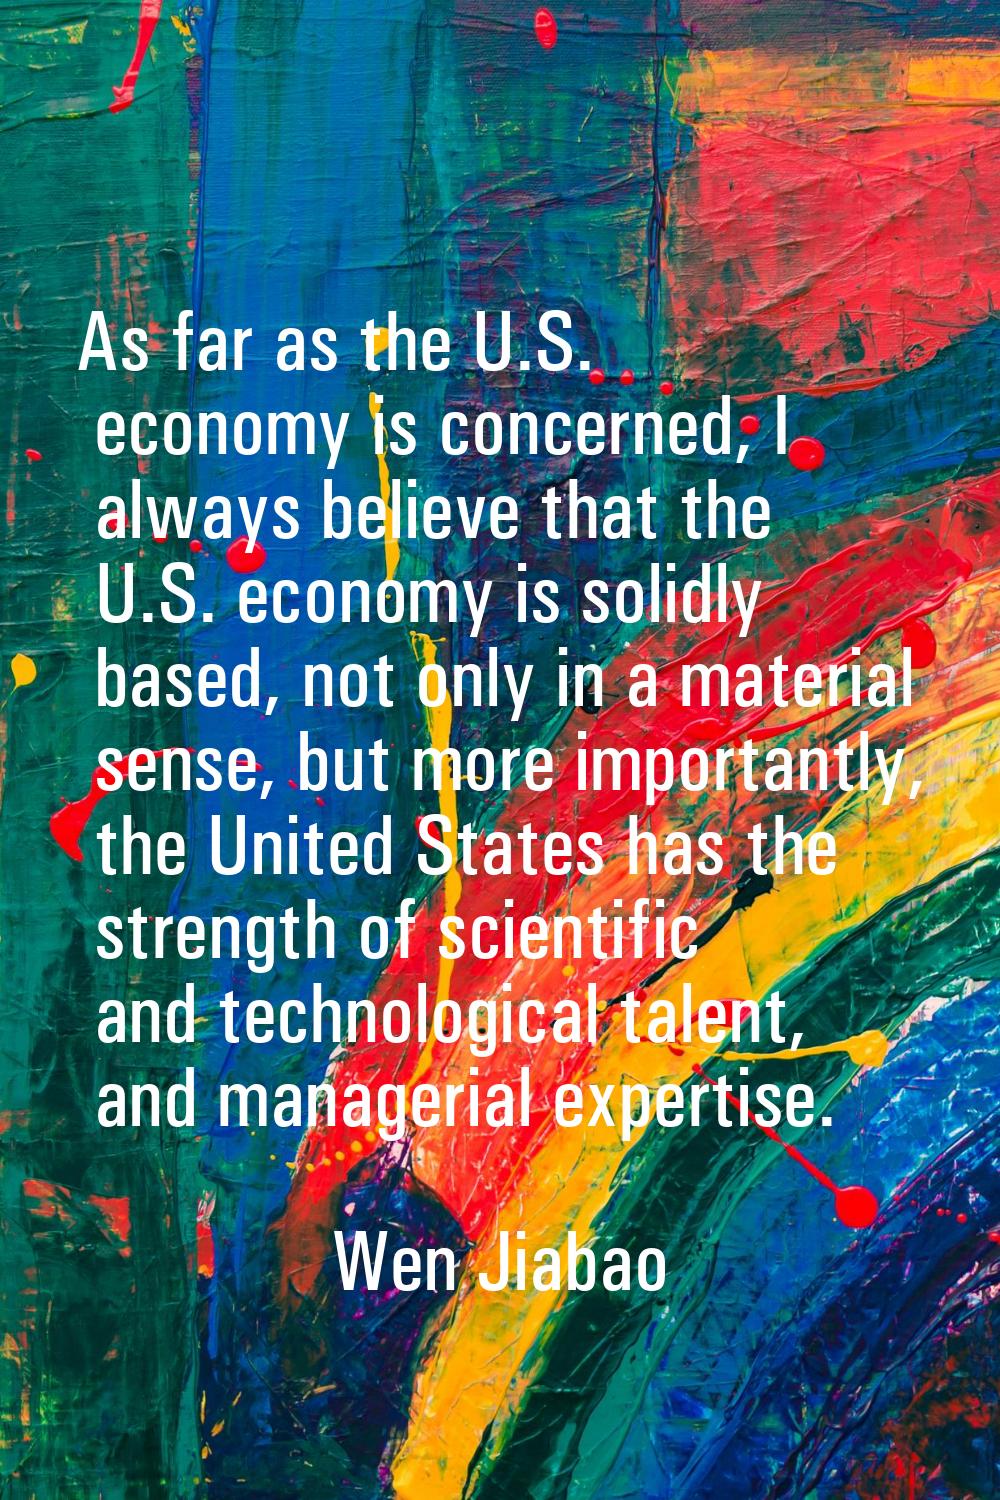 As far as the U.S. economy is concerned, I always believe that the U.S. economy is solidly based, n